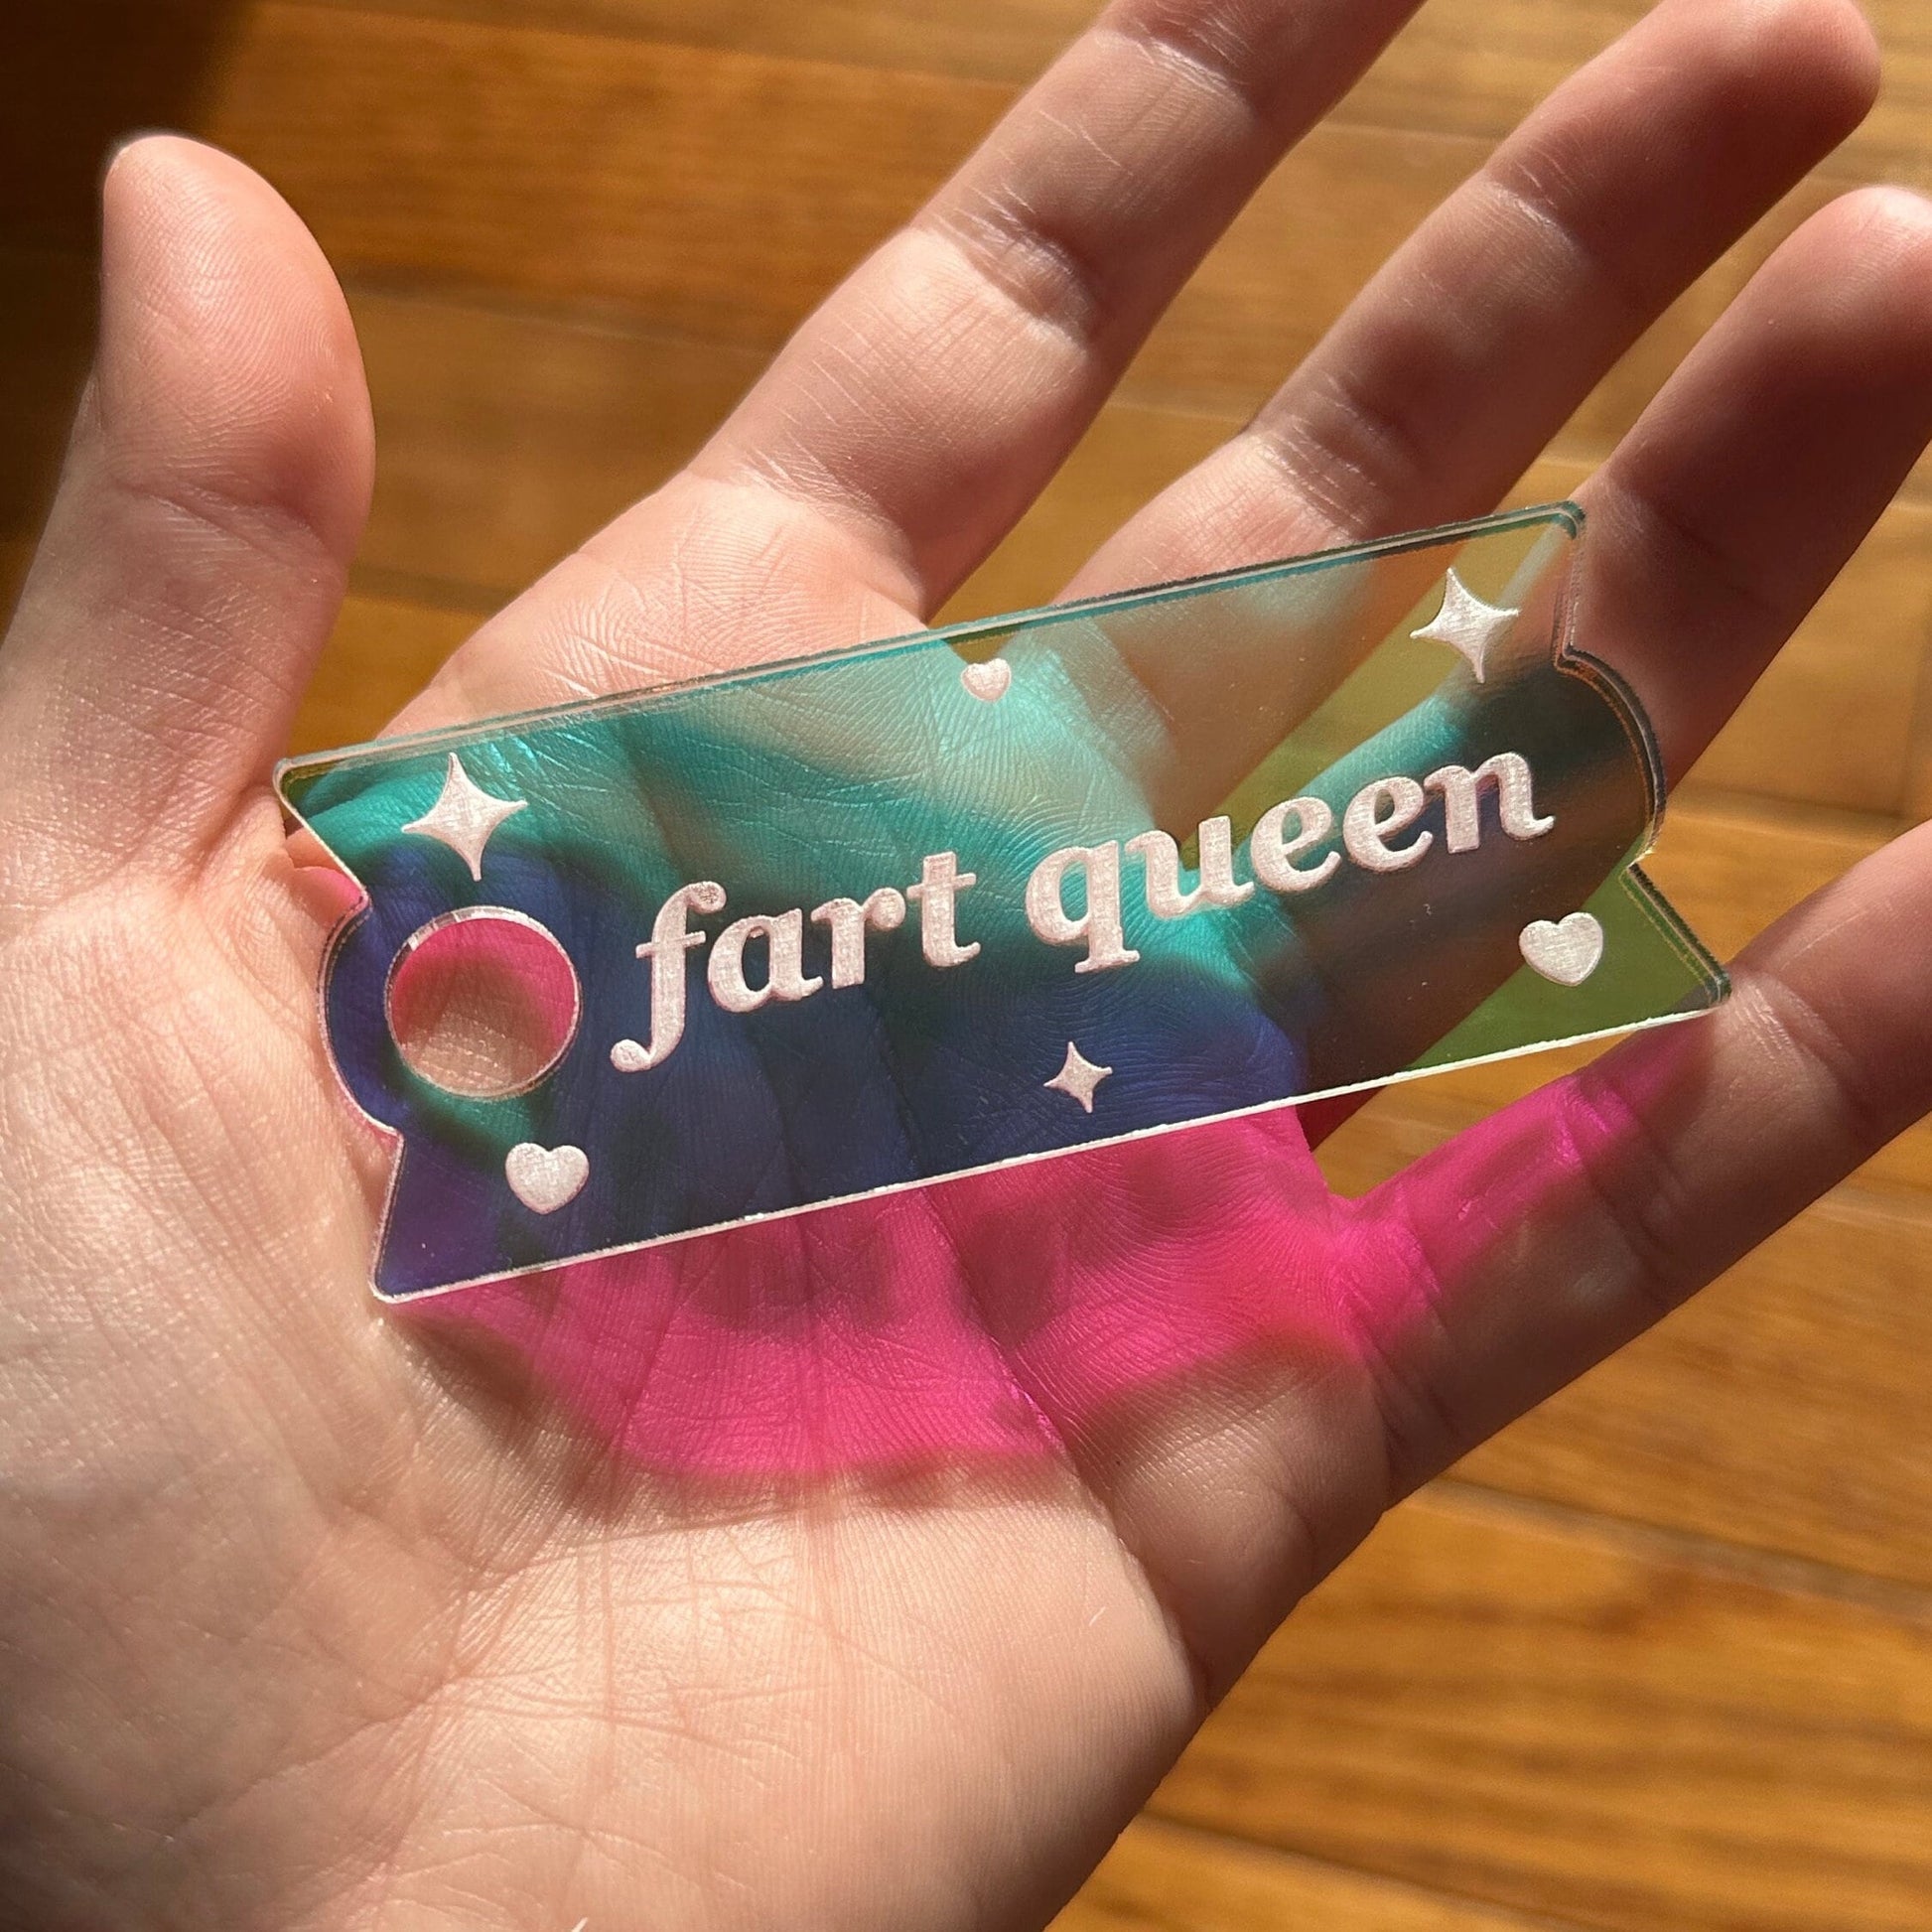 Iridescent Fart Queen Tumbler Topper 40 oz Size (Fits New 2.0 Cups Only Read Below!)